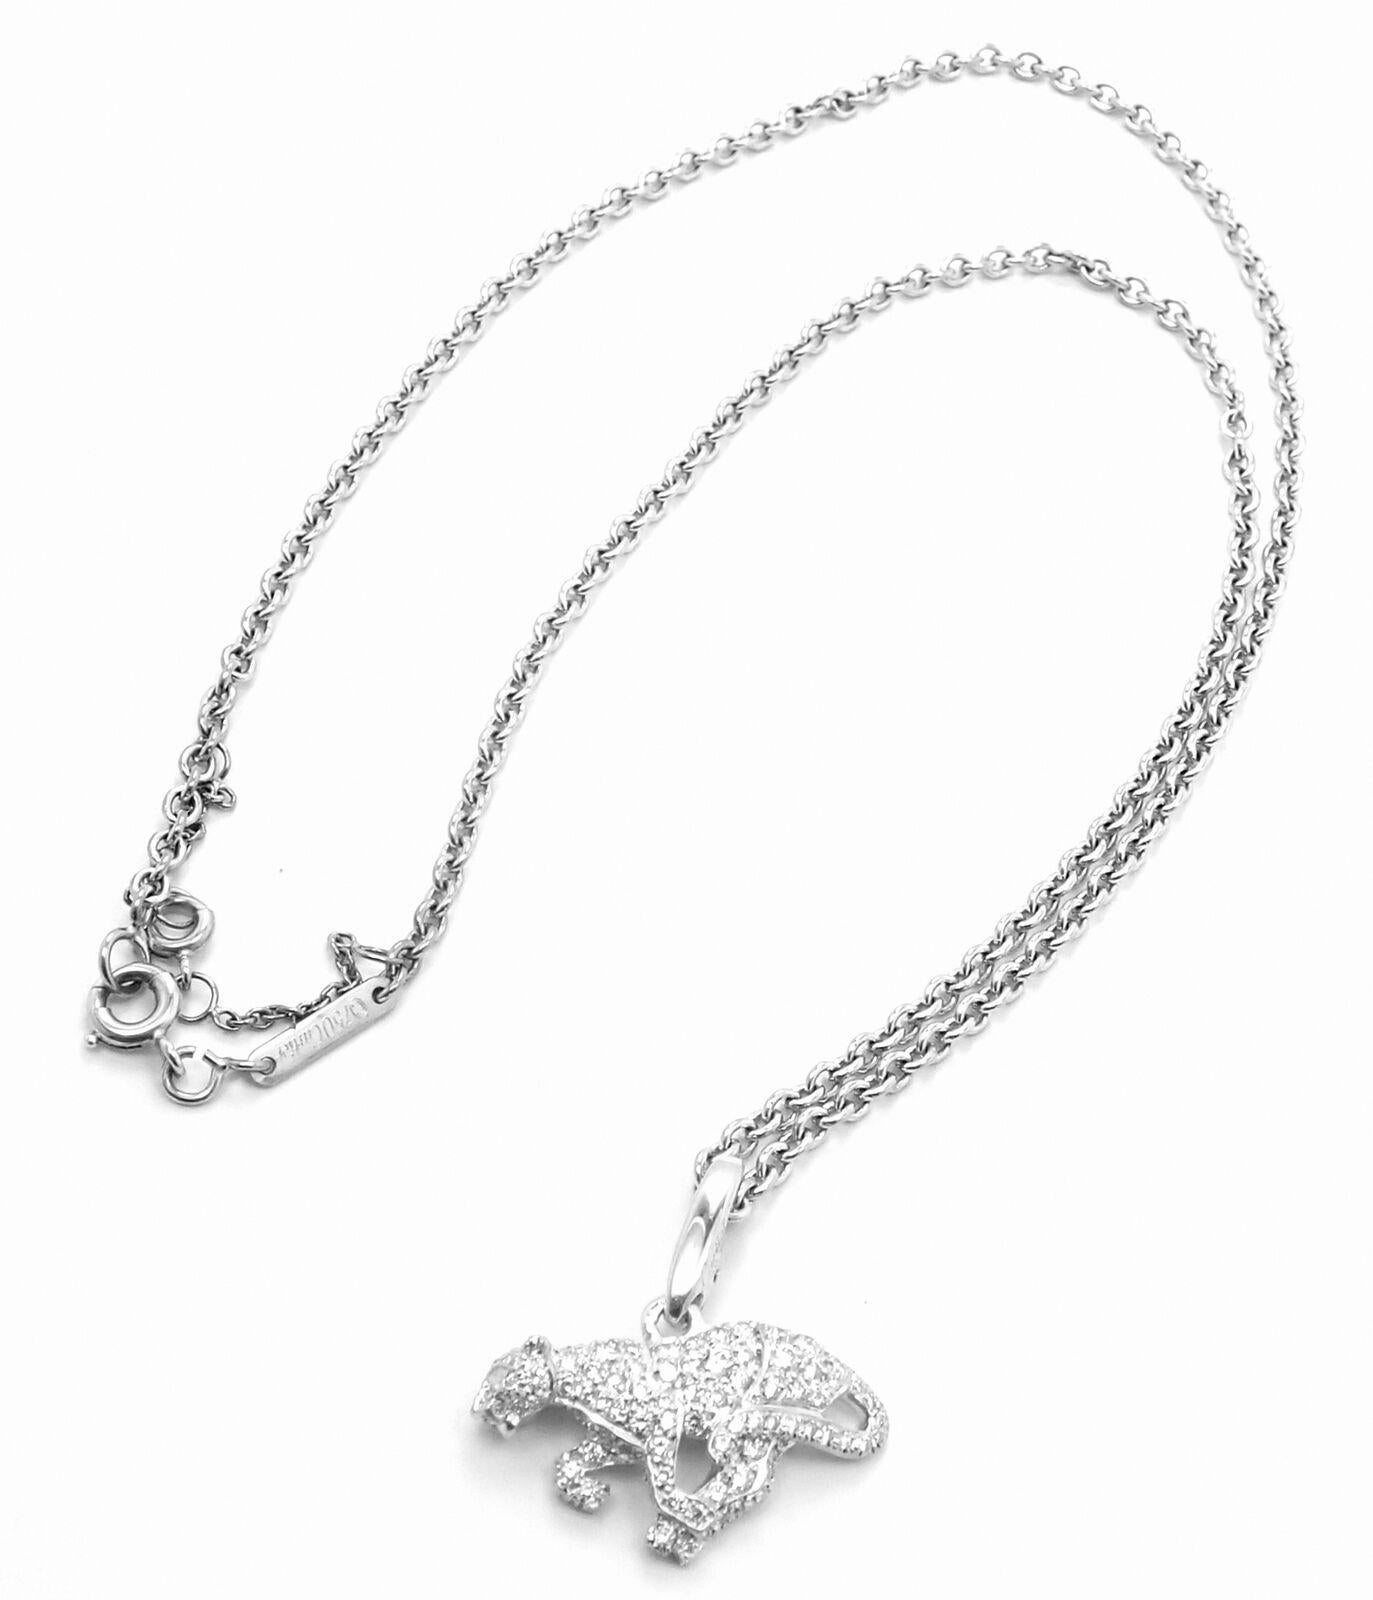 18k White Gold Panther Diamond Pendant Necklace by Cartier. 
Part of the Panthere Collection. 
With Round brilliant cut diamonds VVS1 clarity, E color total weight approx. .50ct
This necklace comes with Cartier certificate of authenticity.
Details: